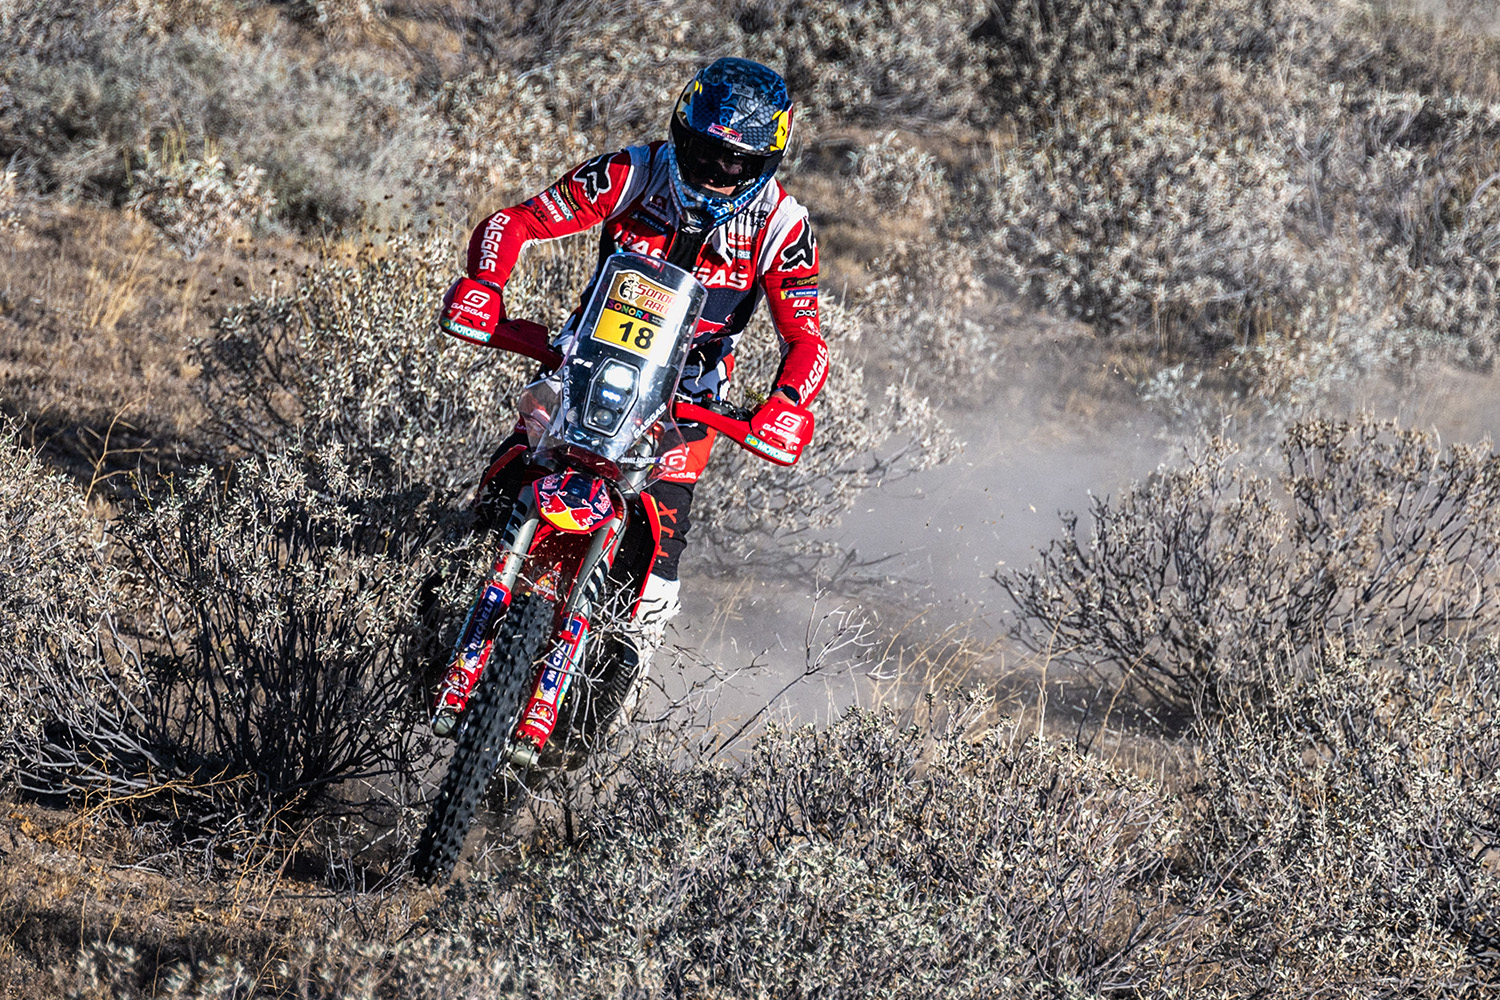 Sonora Rally results: Daniel Sanders extends race lead with stage 3 win